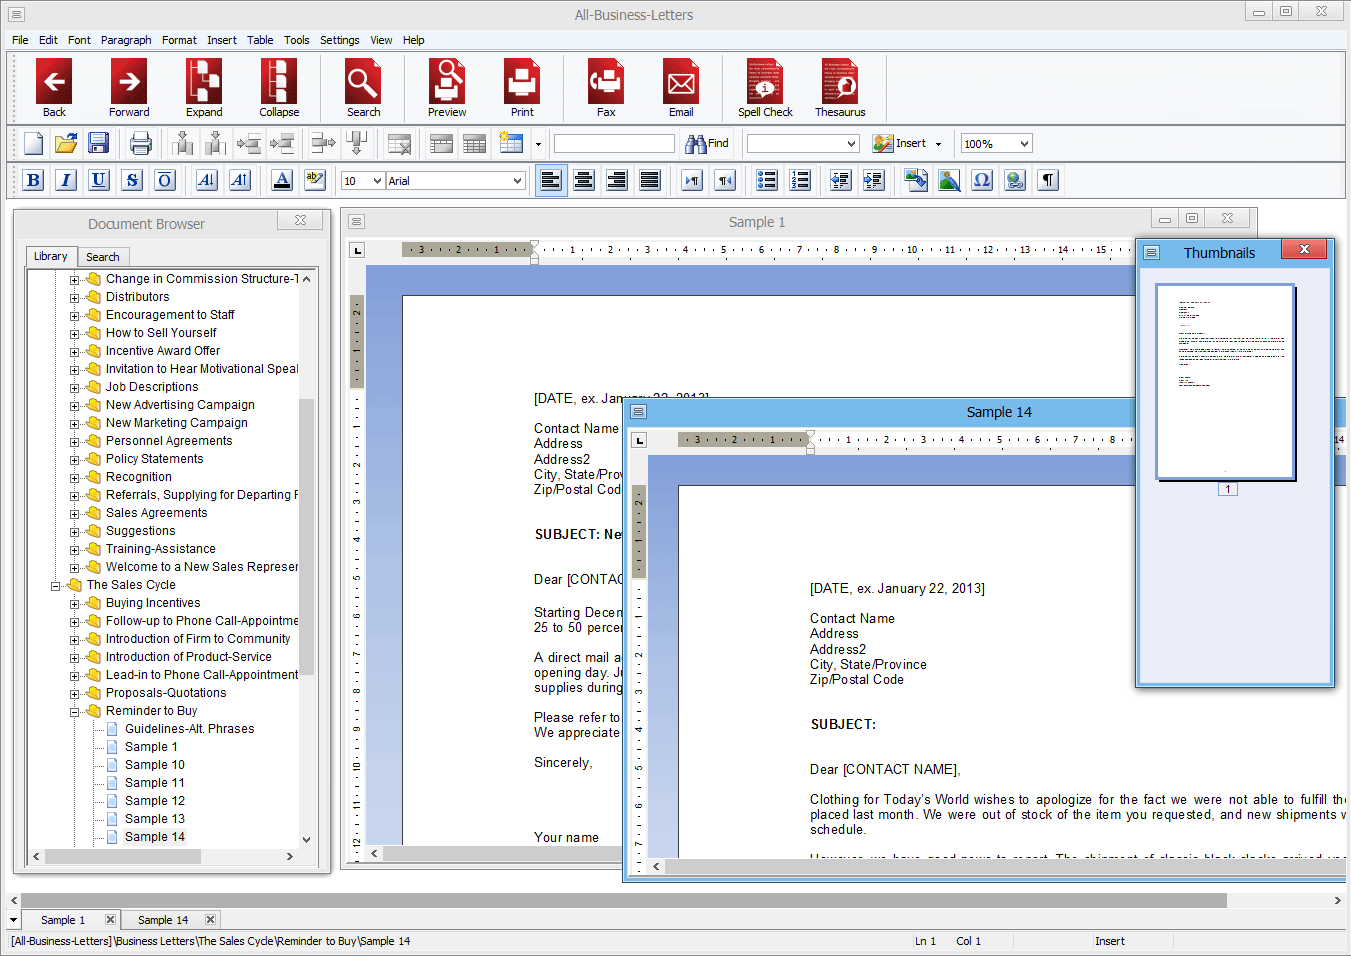 All-Business-Letters for Windows